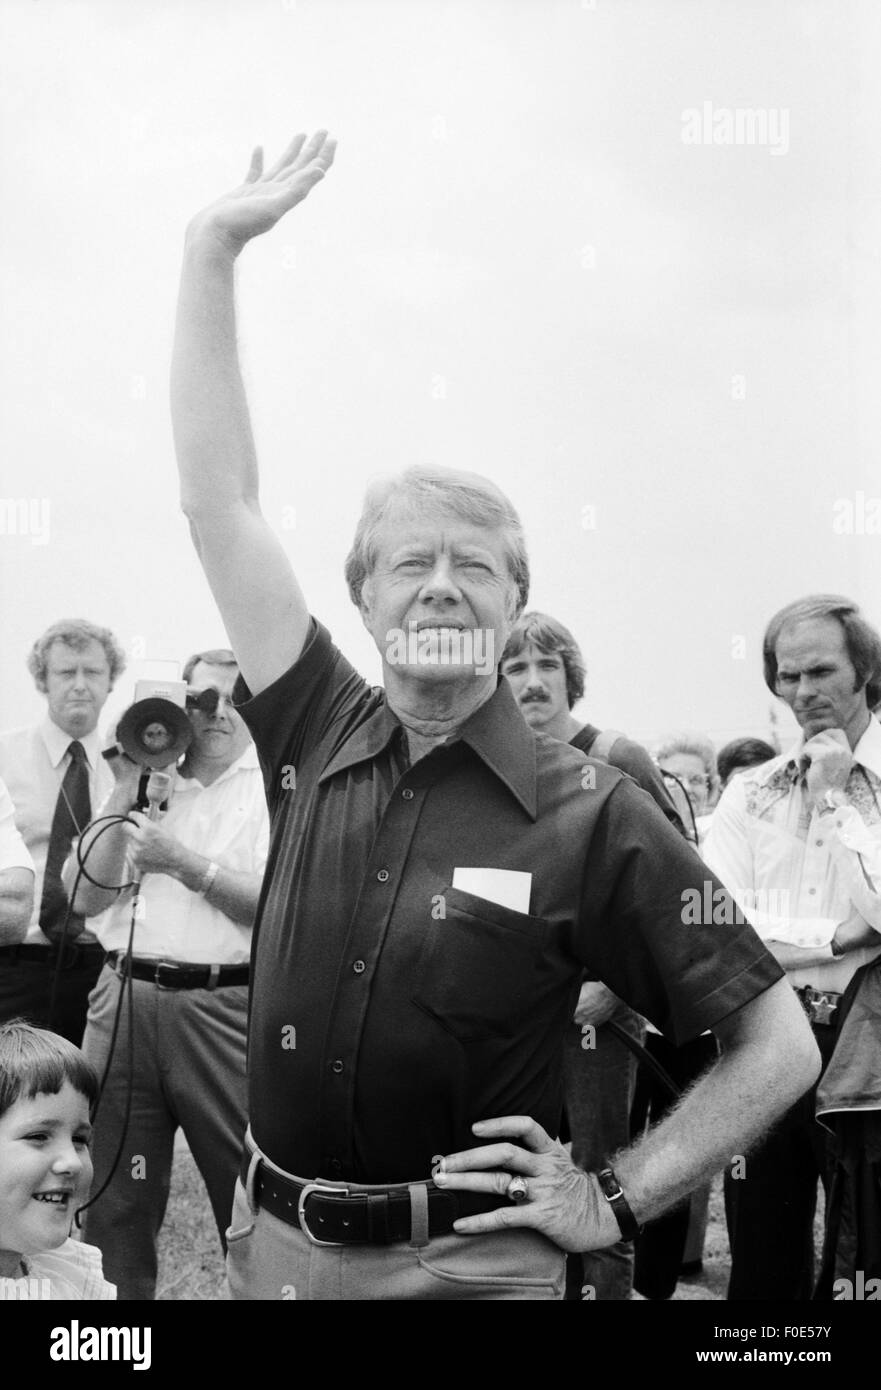 Plains, Georgia, USA. 8th Mar, 2014. Jimmy Carter waves as CIA Director George H.W. Bush departs the small airfield at Plains, Georgia after an intelligence briefing with Carter. © Ken Hawkins/ZUMA Wire/Alamy Live News Stock Photo